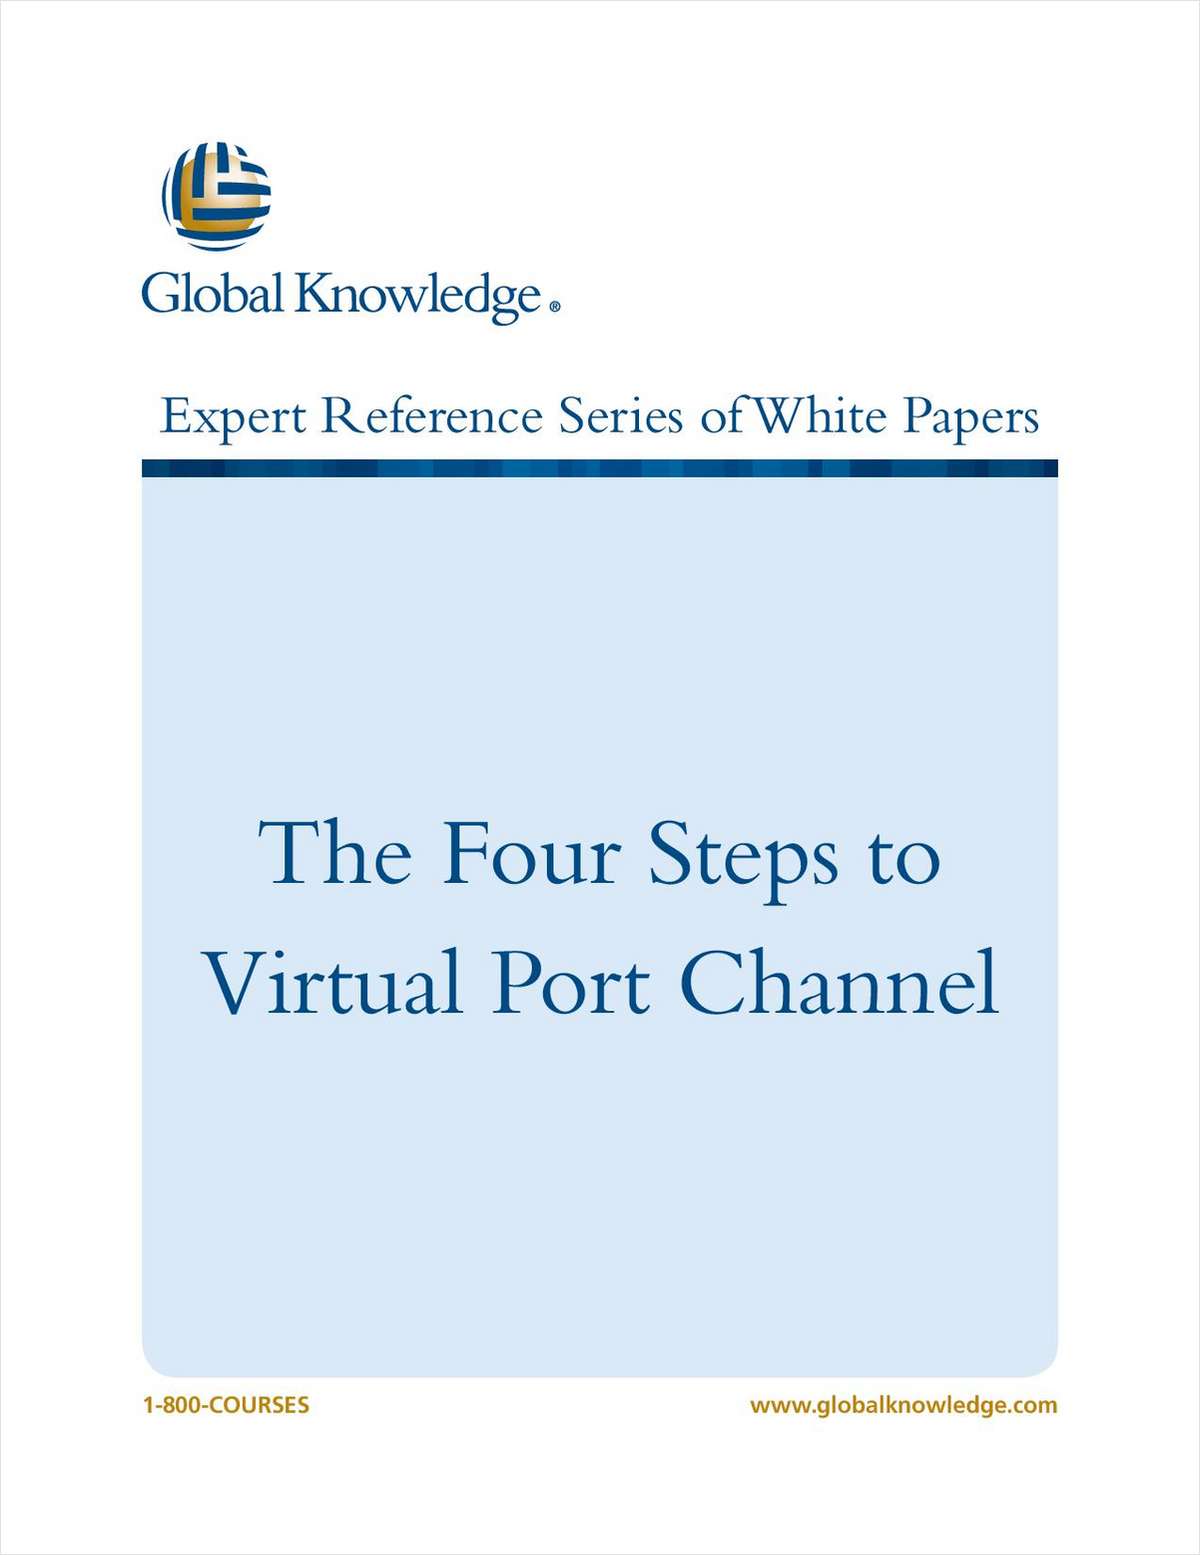 The Four Steps to Virtual Port Channel